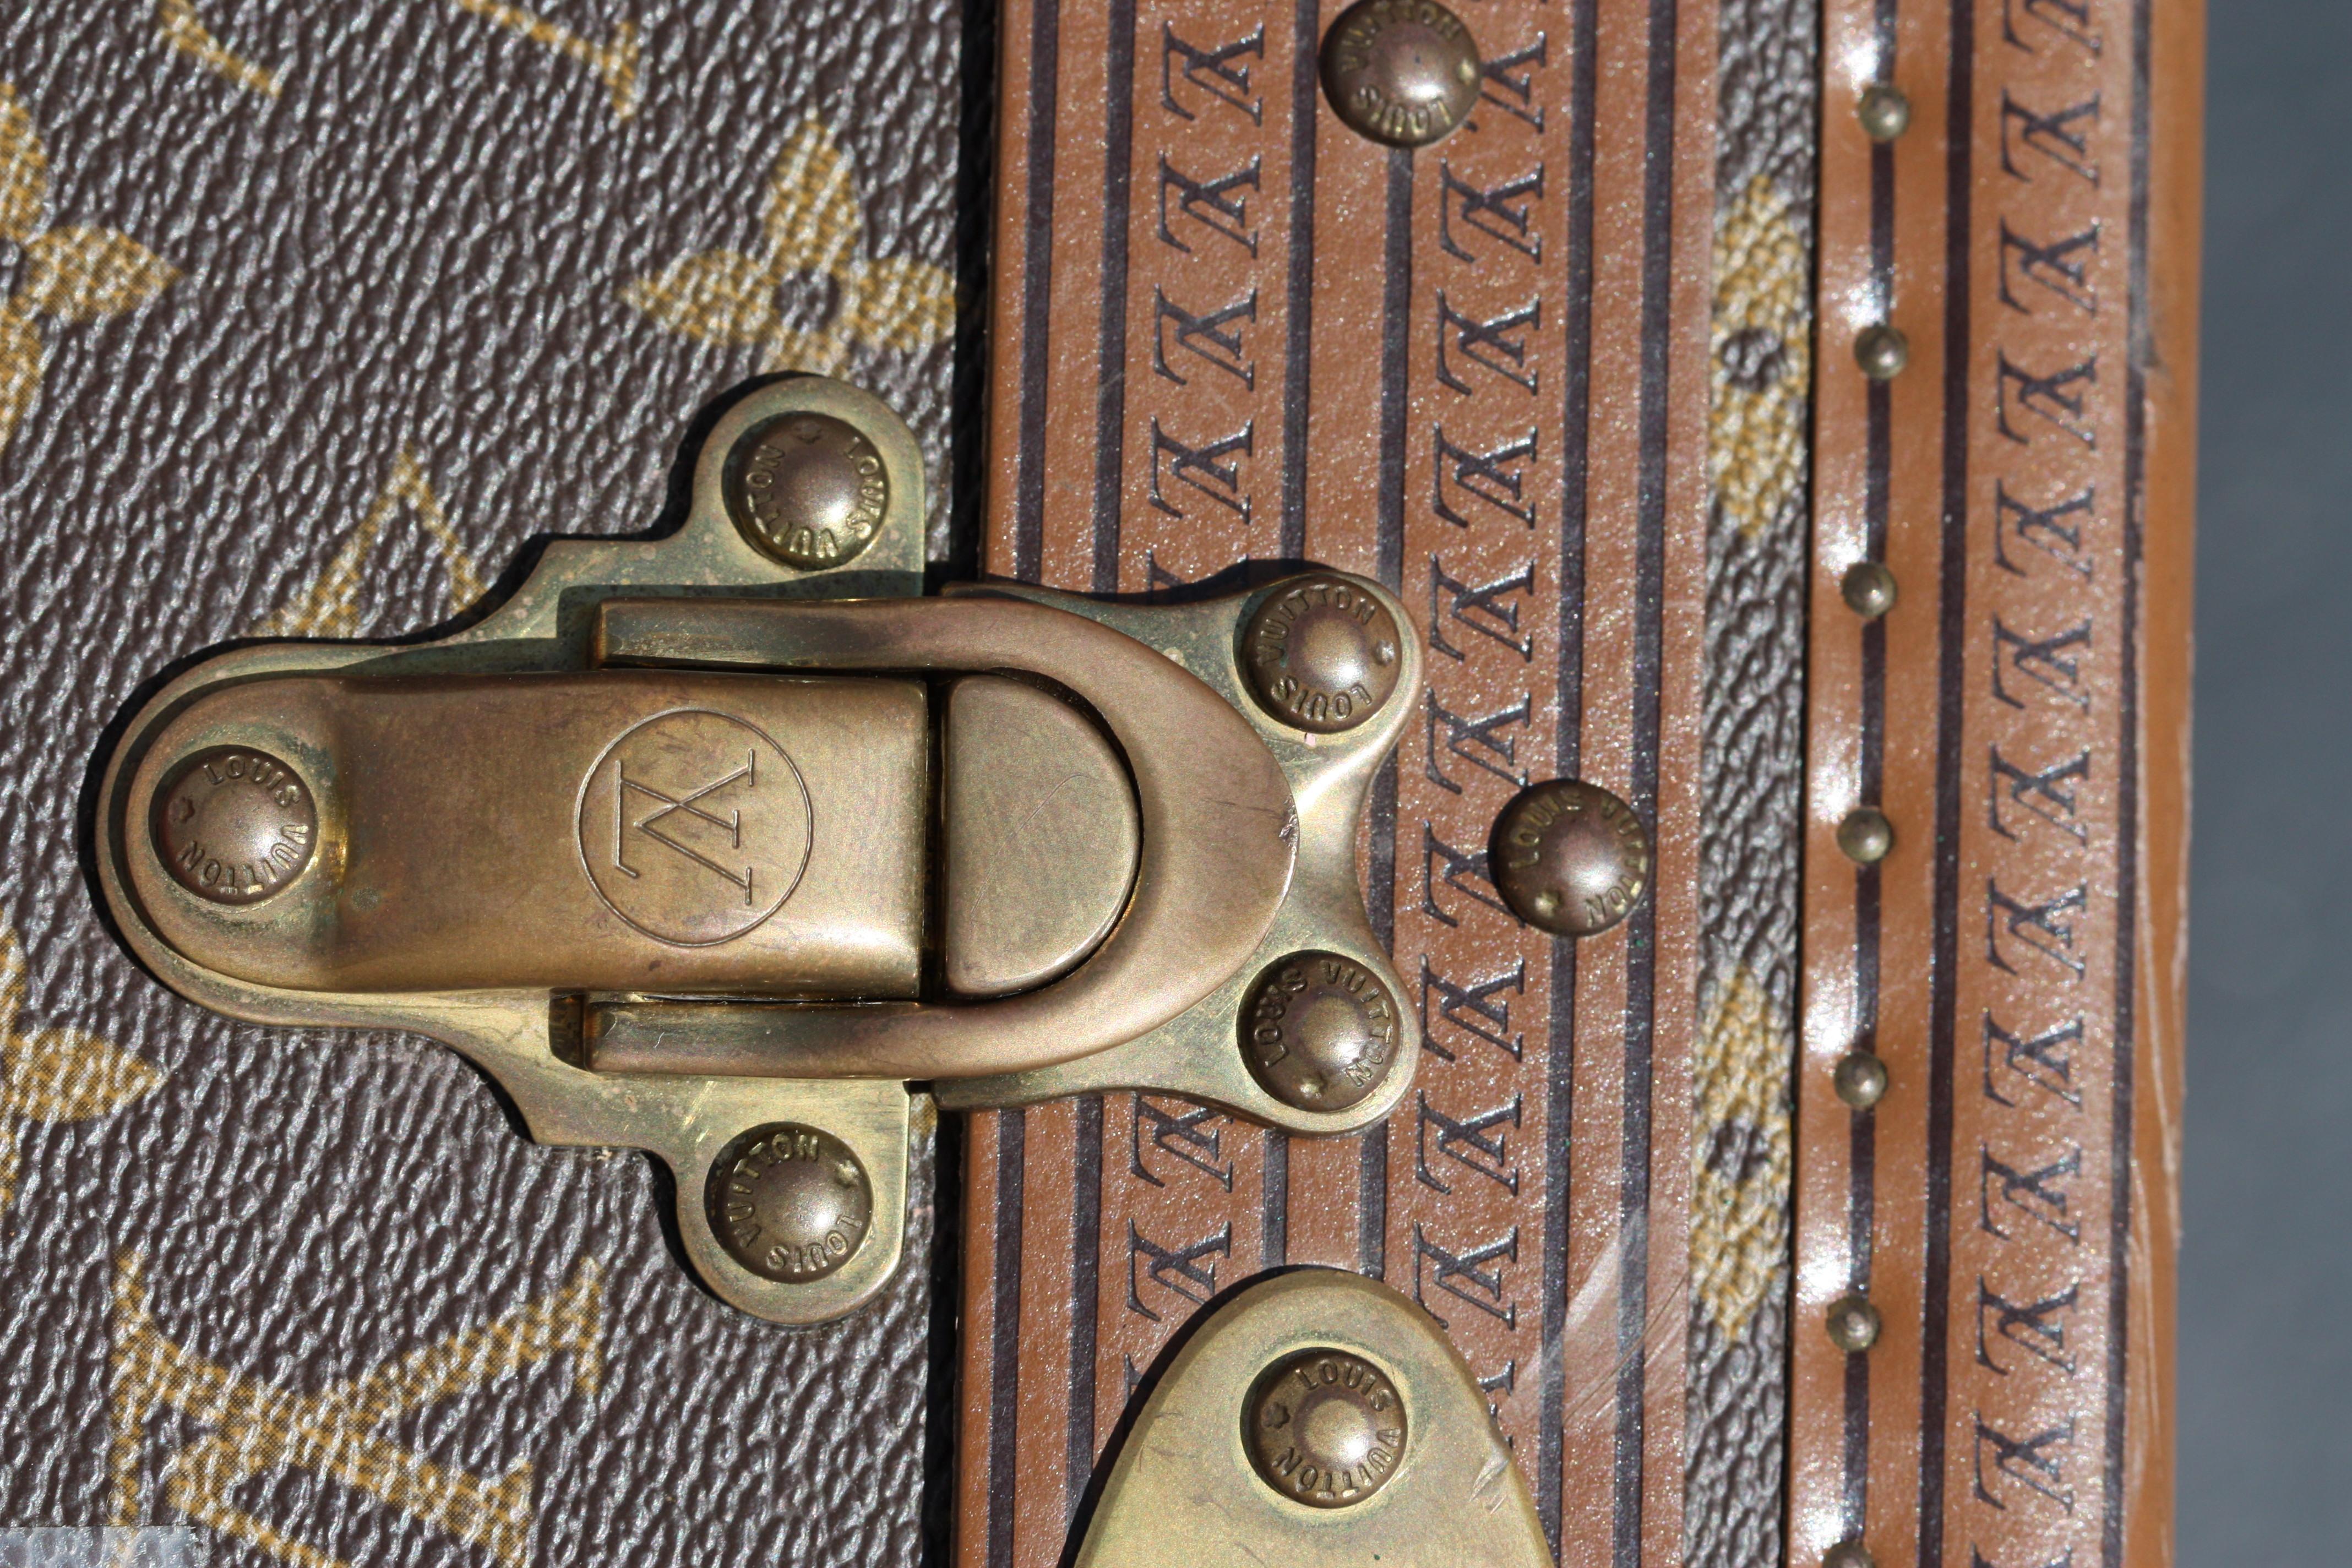 A Collection of Four Louis Vuitton Suitcases with monogram pattern, leather edging, brass locks, catches, corners and rivets
each lock stamped Louis Vuitton Made in France. 
Measures: Height of the largest 20 in.; width 30 1/2 in.; depth 10